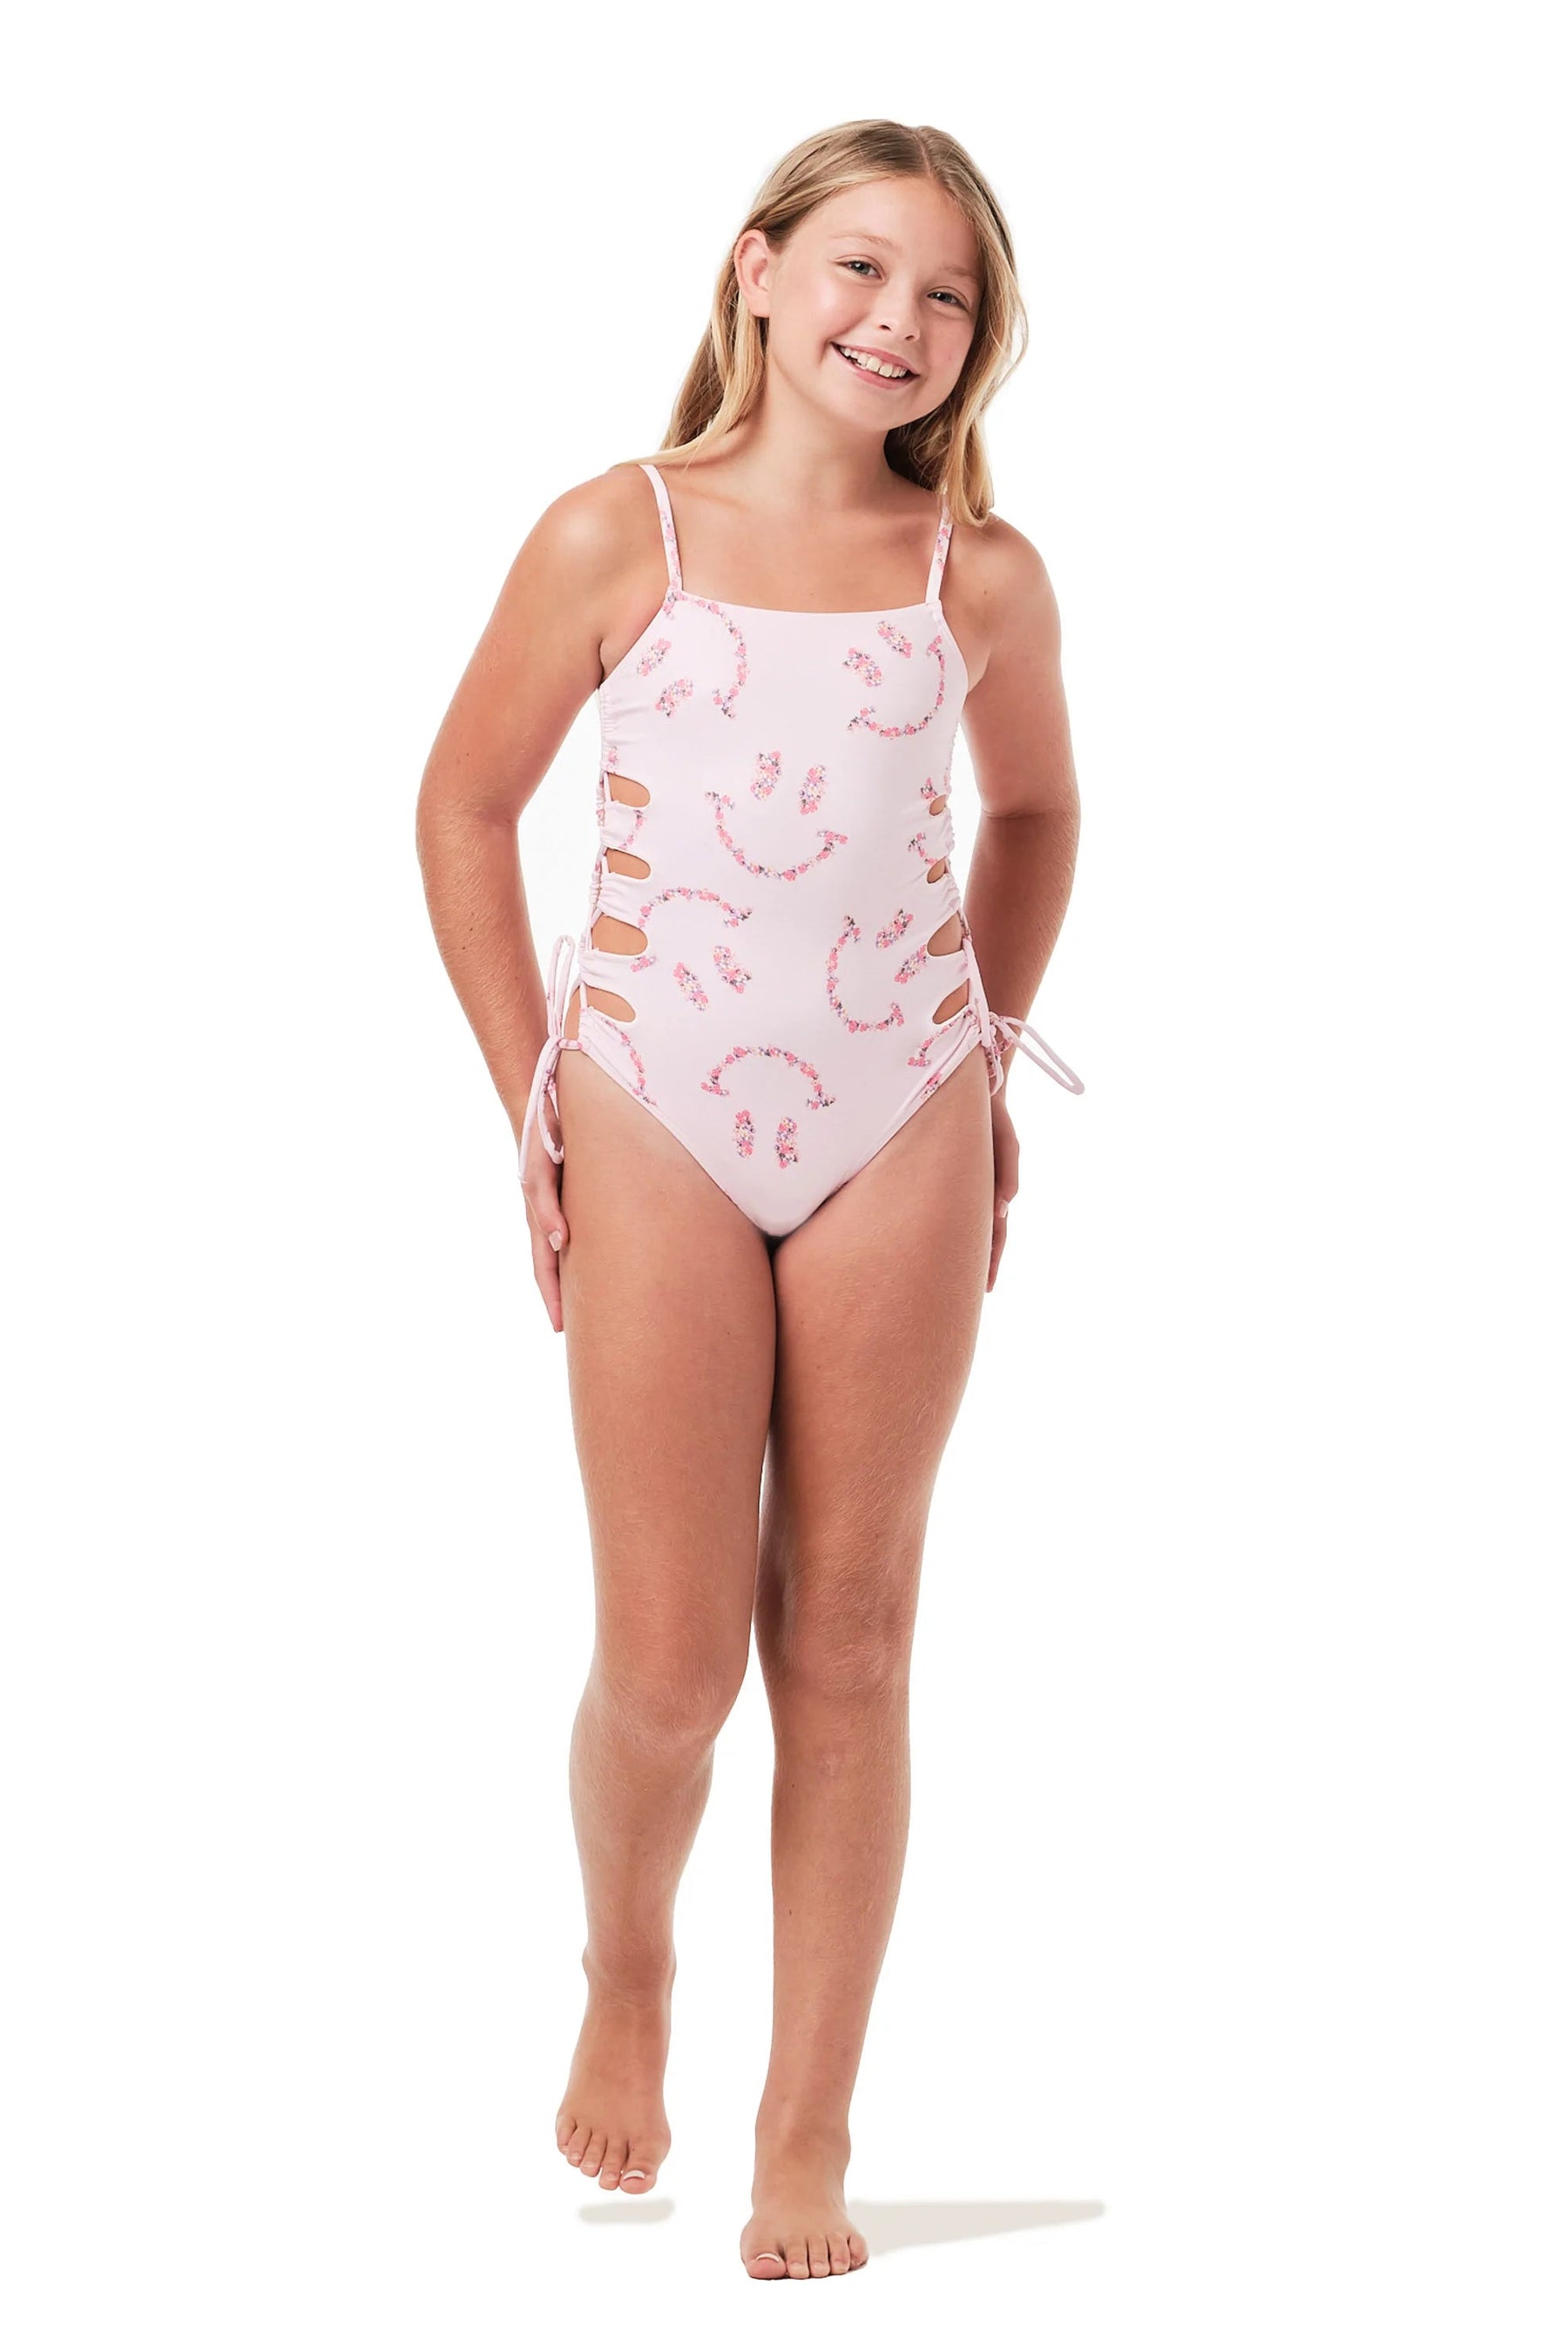 ALL SMILES CRISS CROSS SIDE ONE PIECE SWIMSUIT - ONE PIECE SWIMSUIT